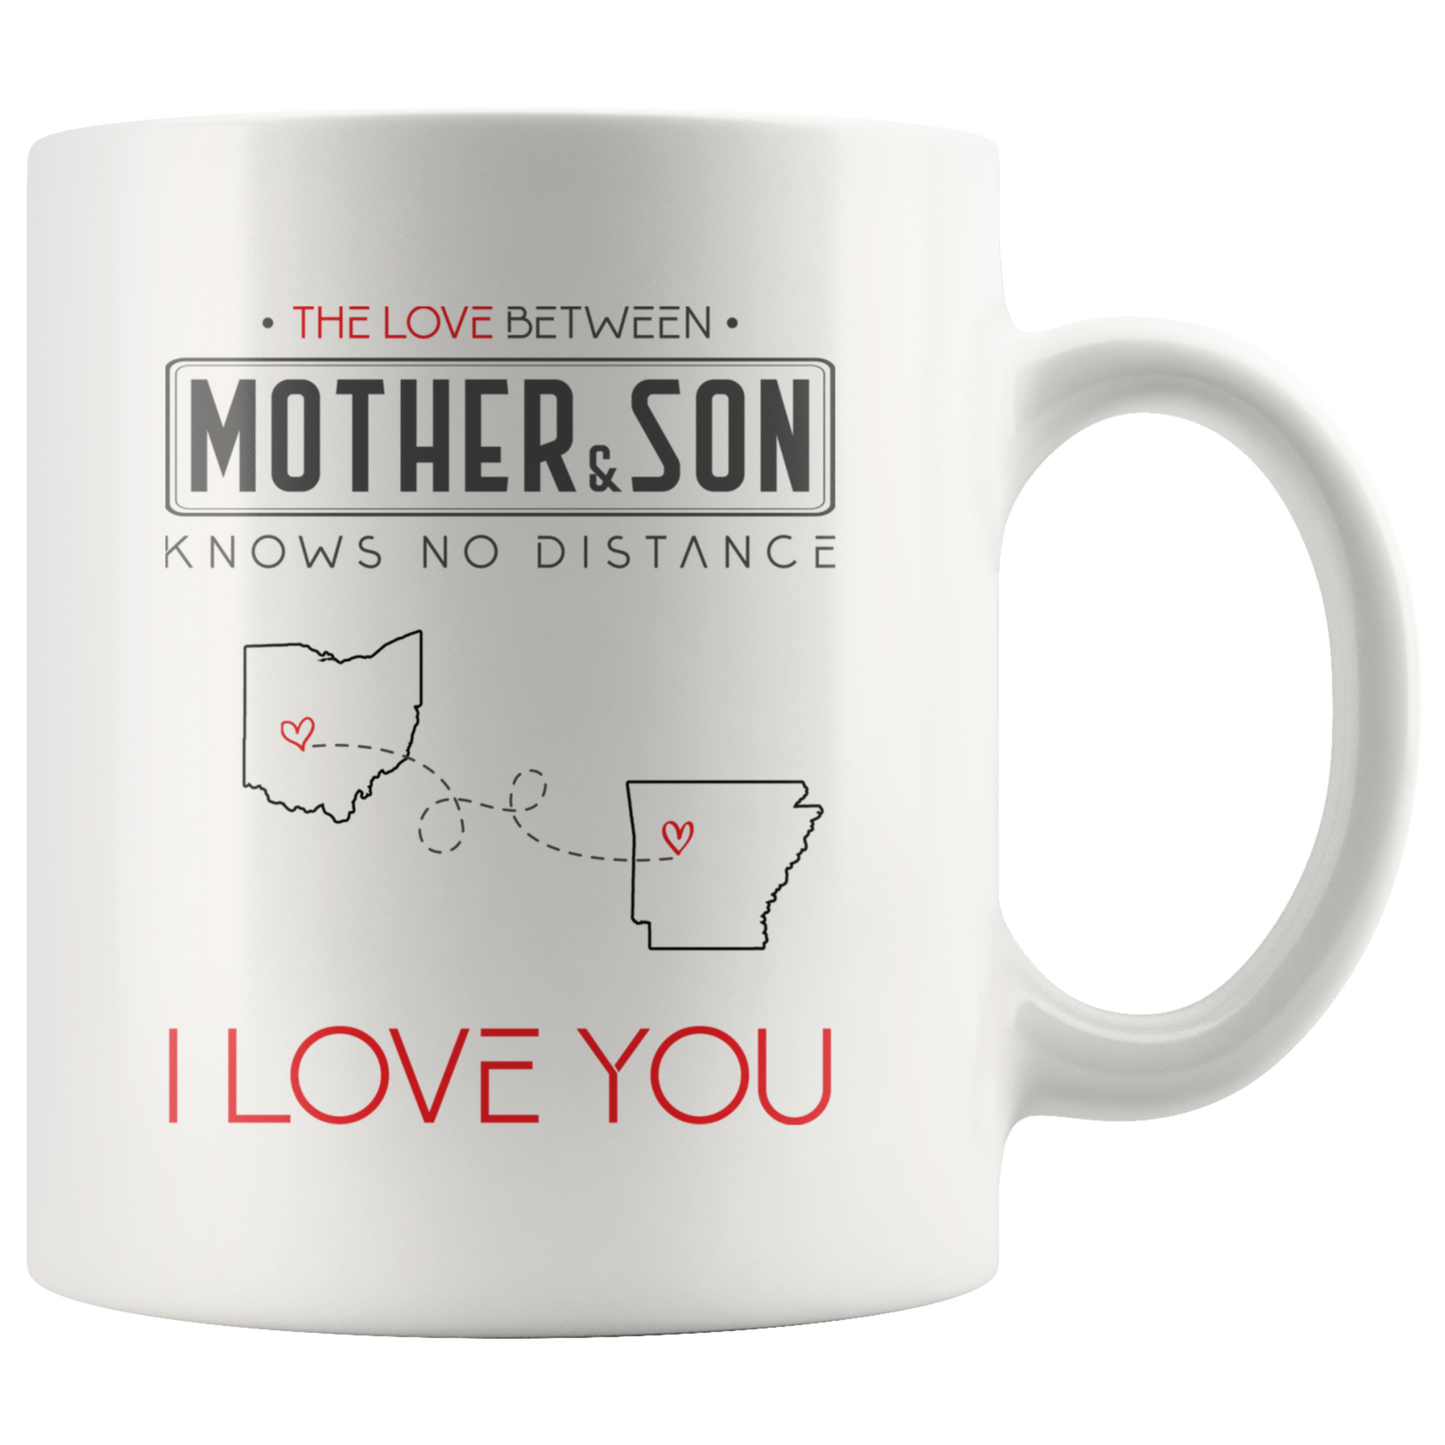 ND-21315669-sp-23366 - Mom And Son Accent Mug 11 oz Red - The Love Between Mother A